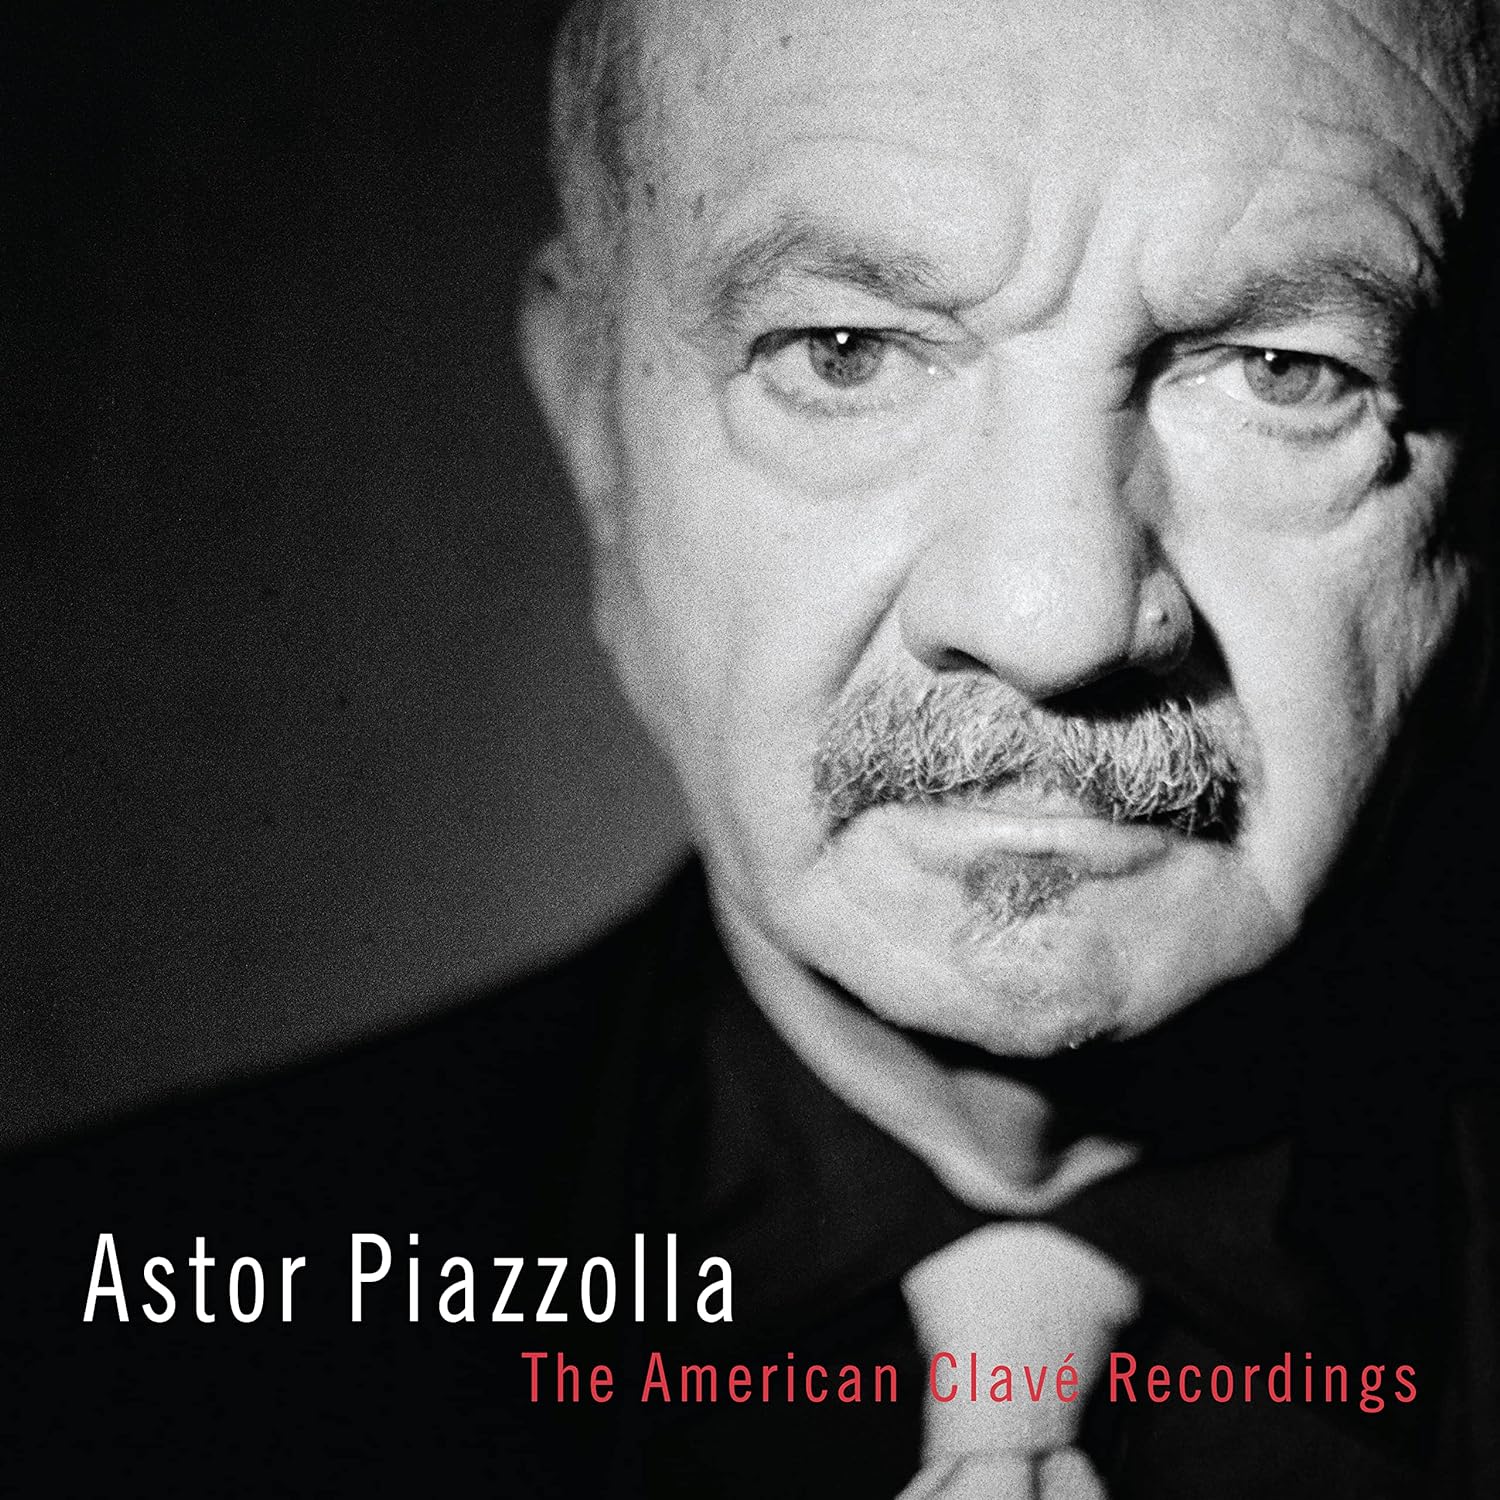 The American Clave Recordings | Astor Piazzolla